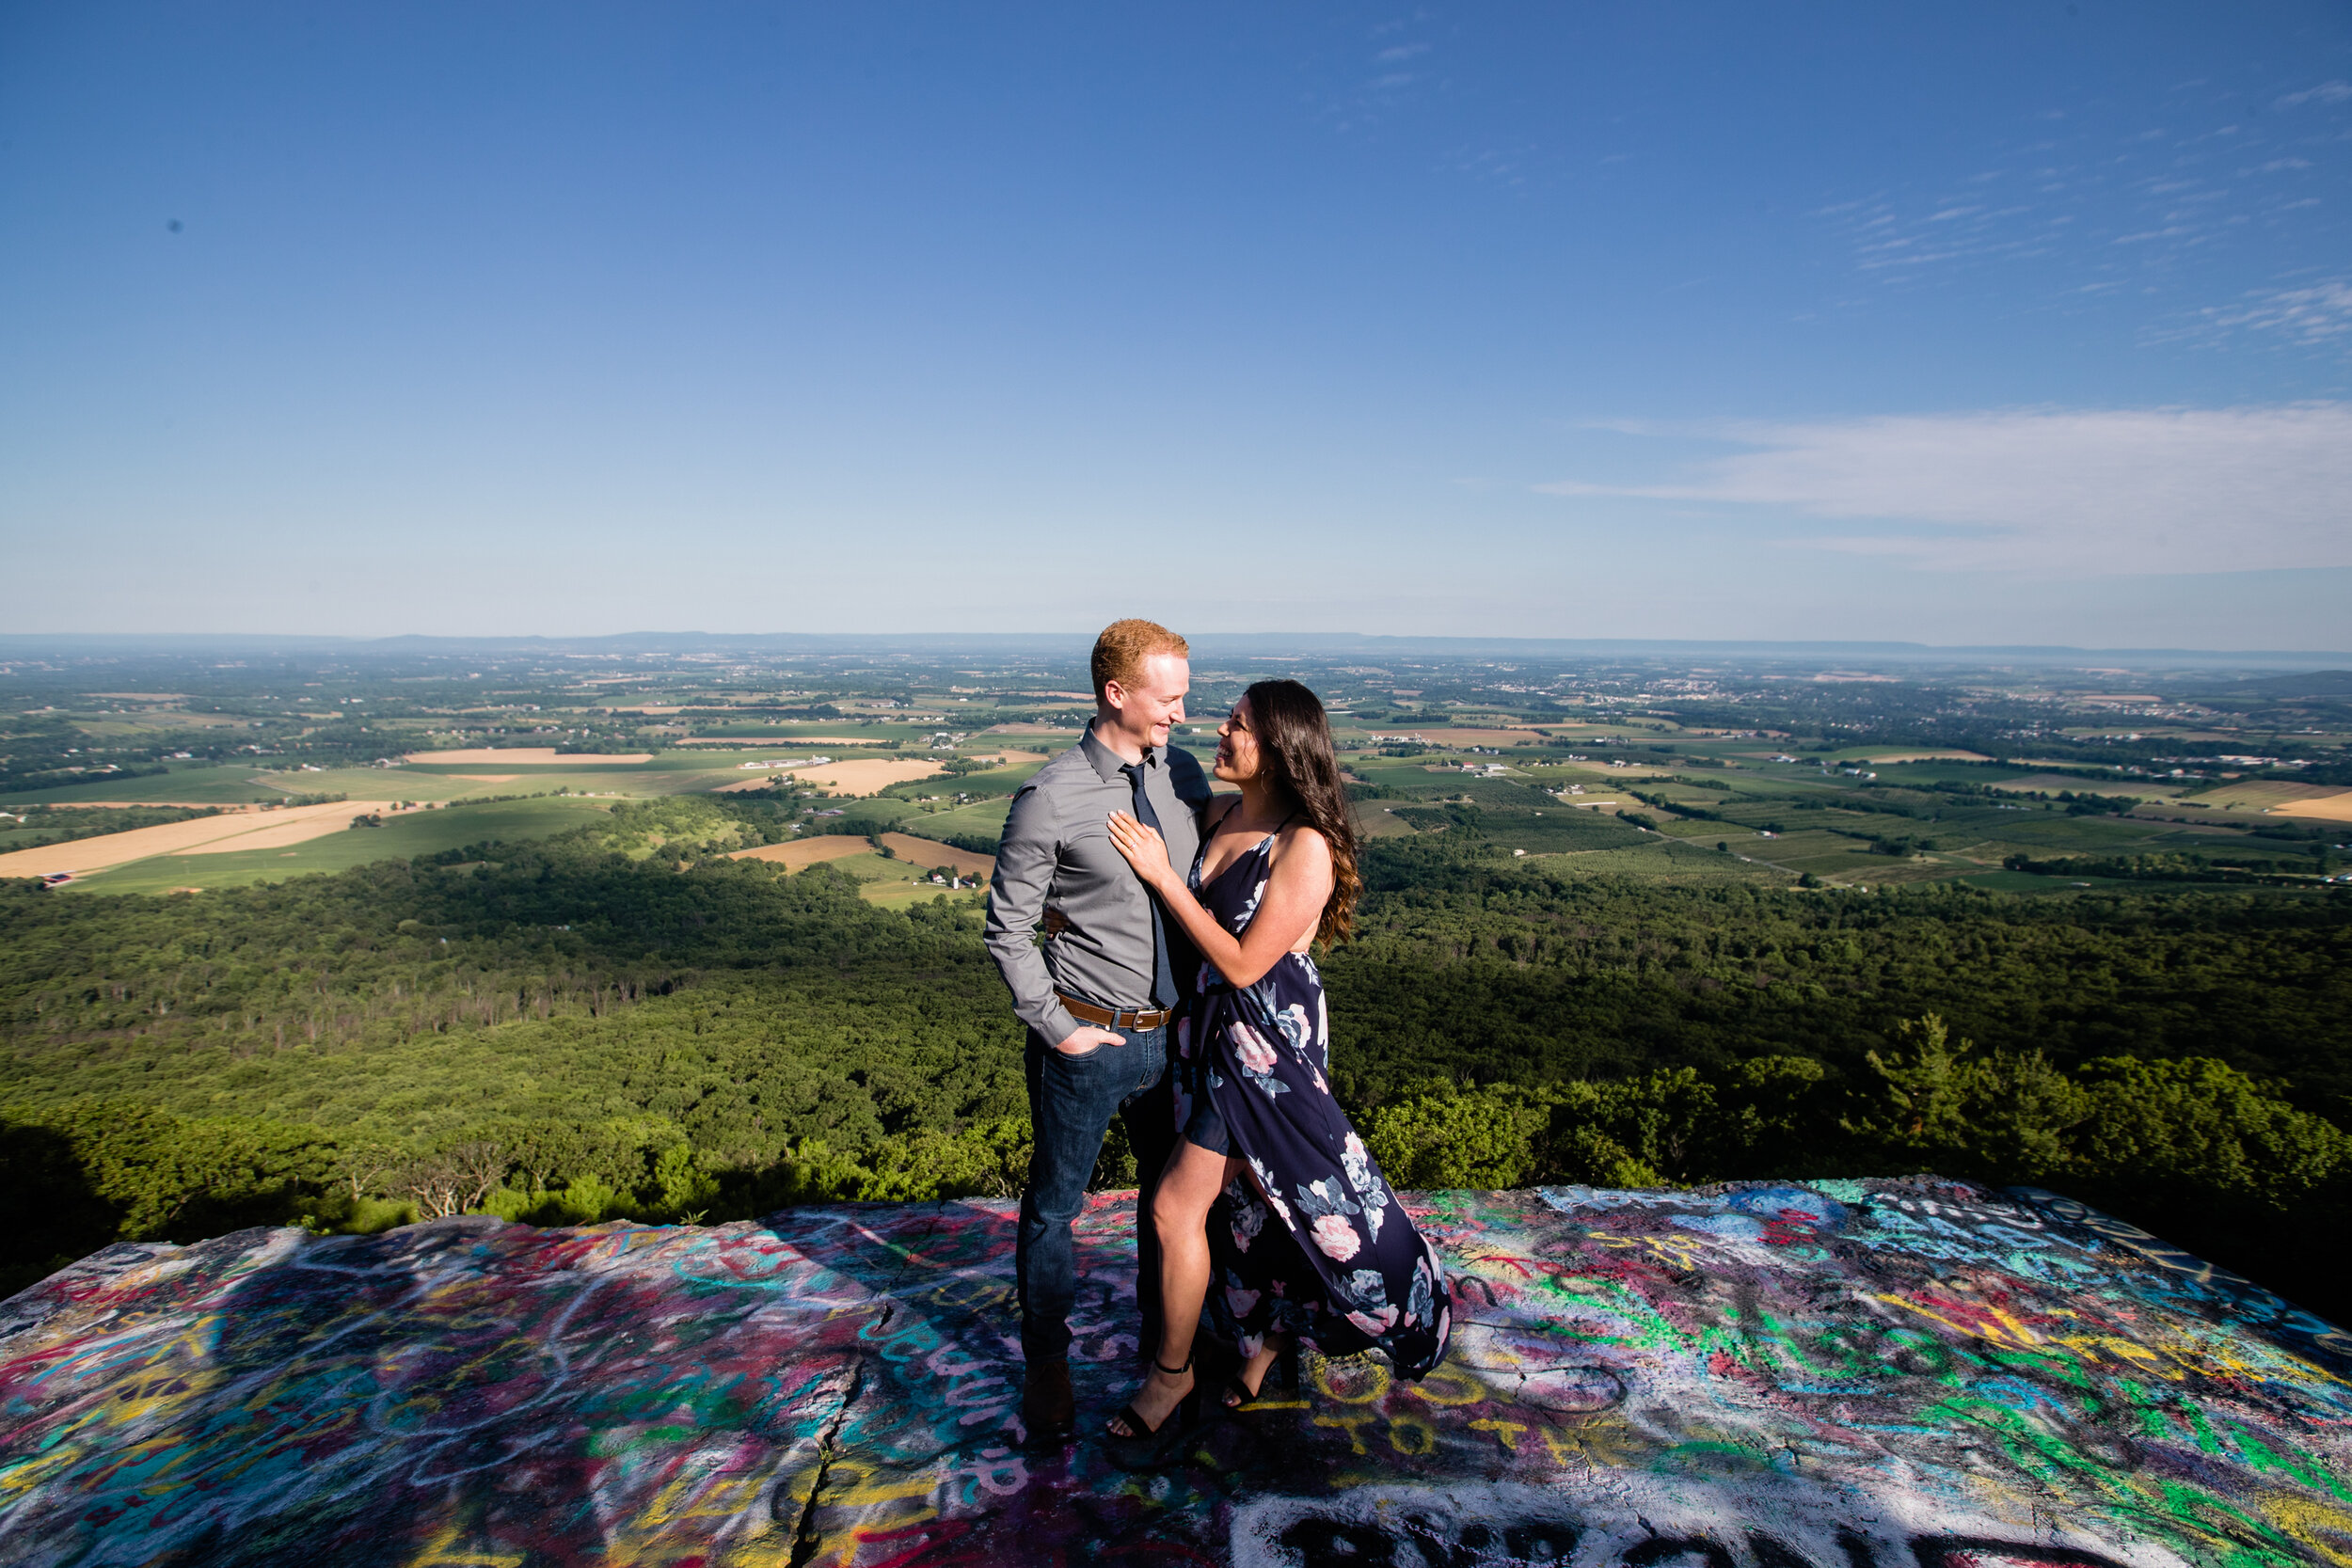 Engagement Session at High Rock Mountain in Western Maryland by Megapixels Media Photography best husband and wife wedding photographers-2.jpg